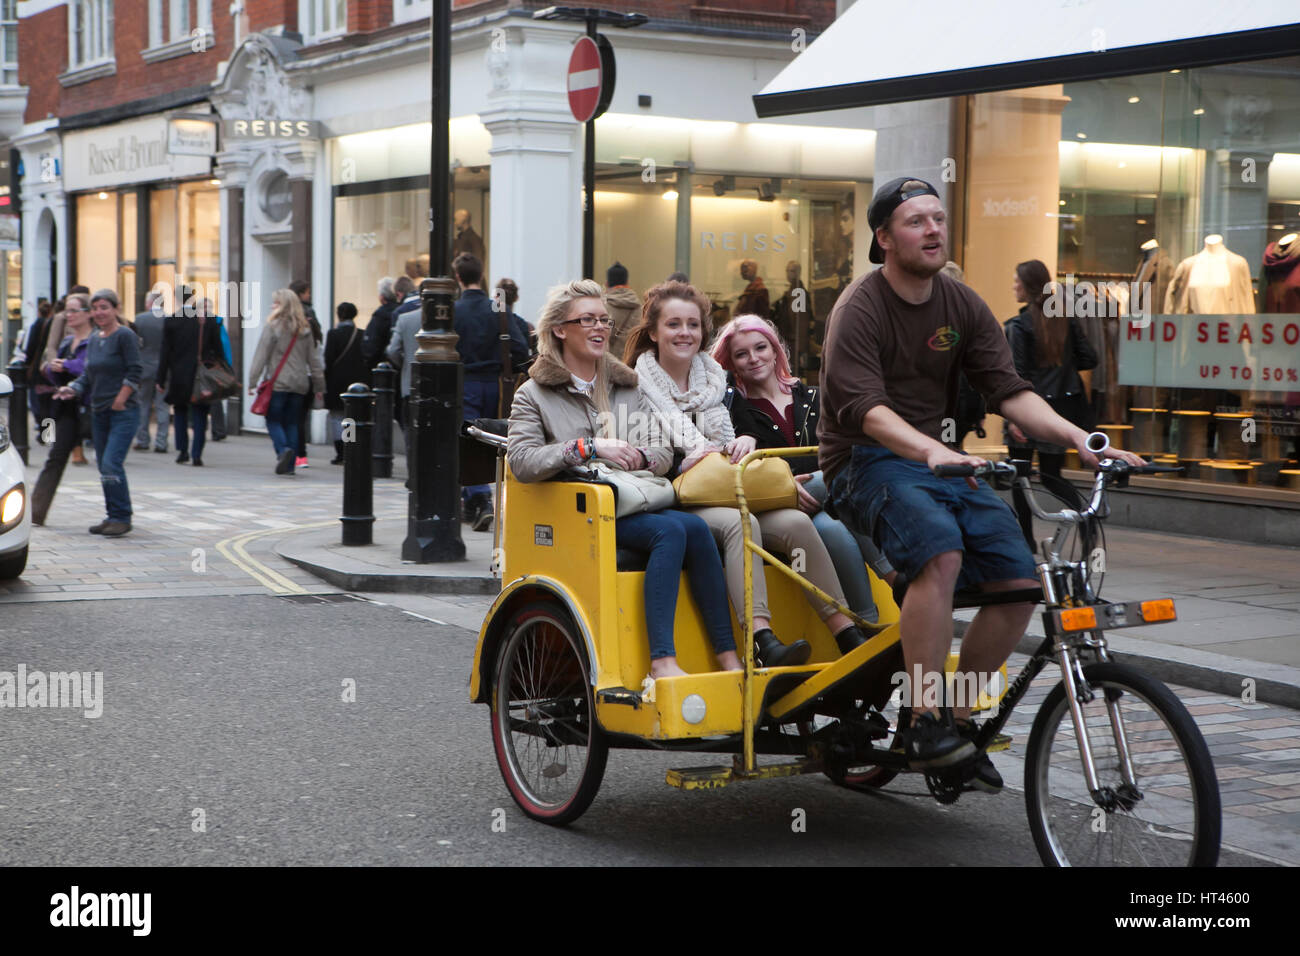 LONDON, UK - 16TH MARCH 2016: A man riding a Rickshaw with happy women in the back down a street in London Stock Photo